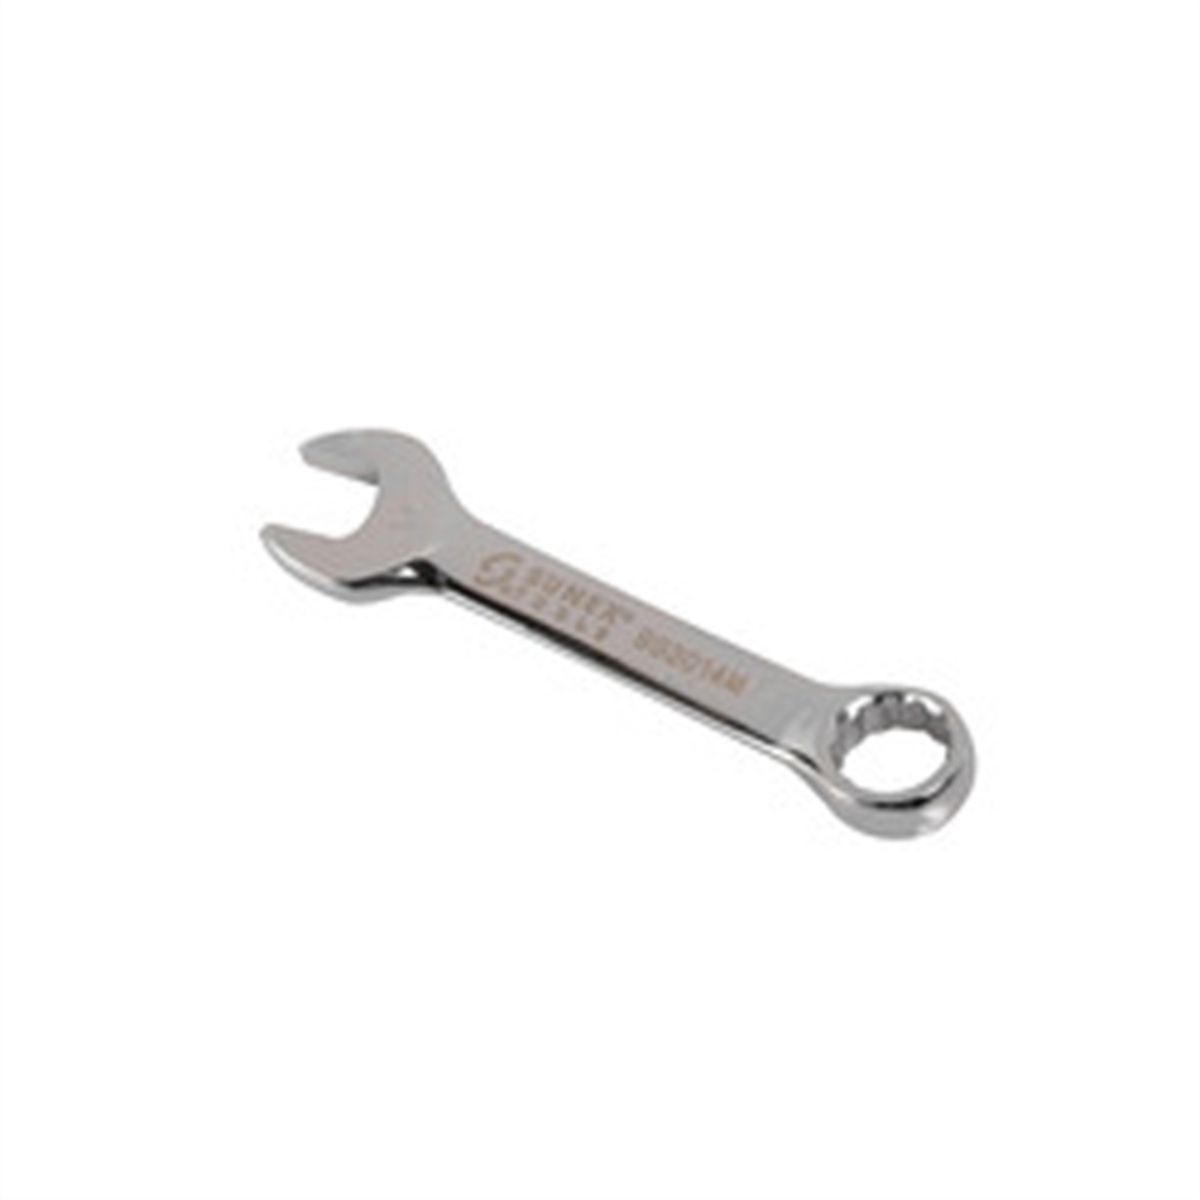 13/16" Stubby Combination Wrench